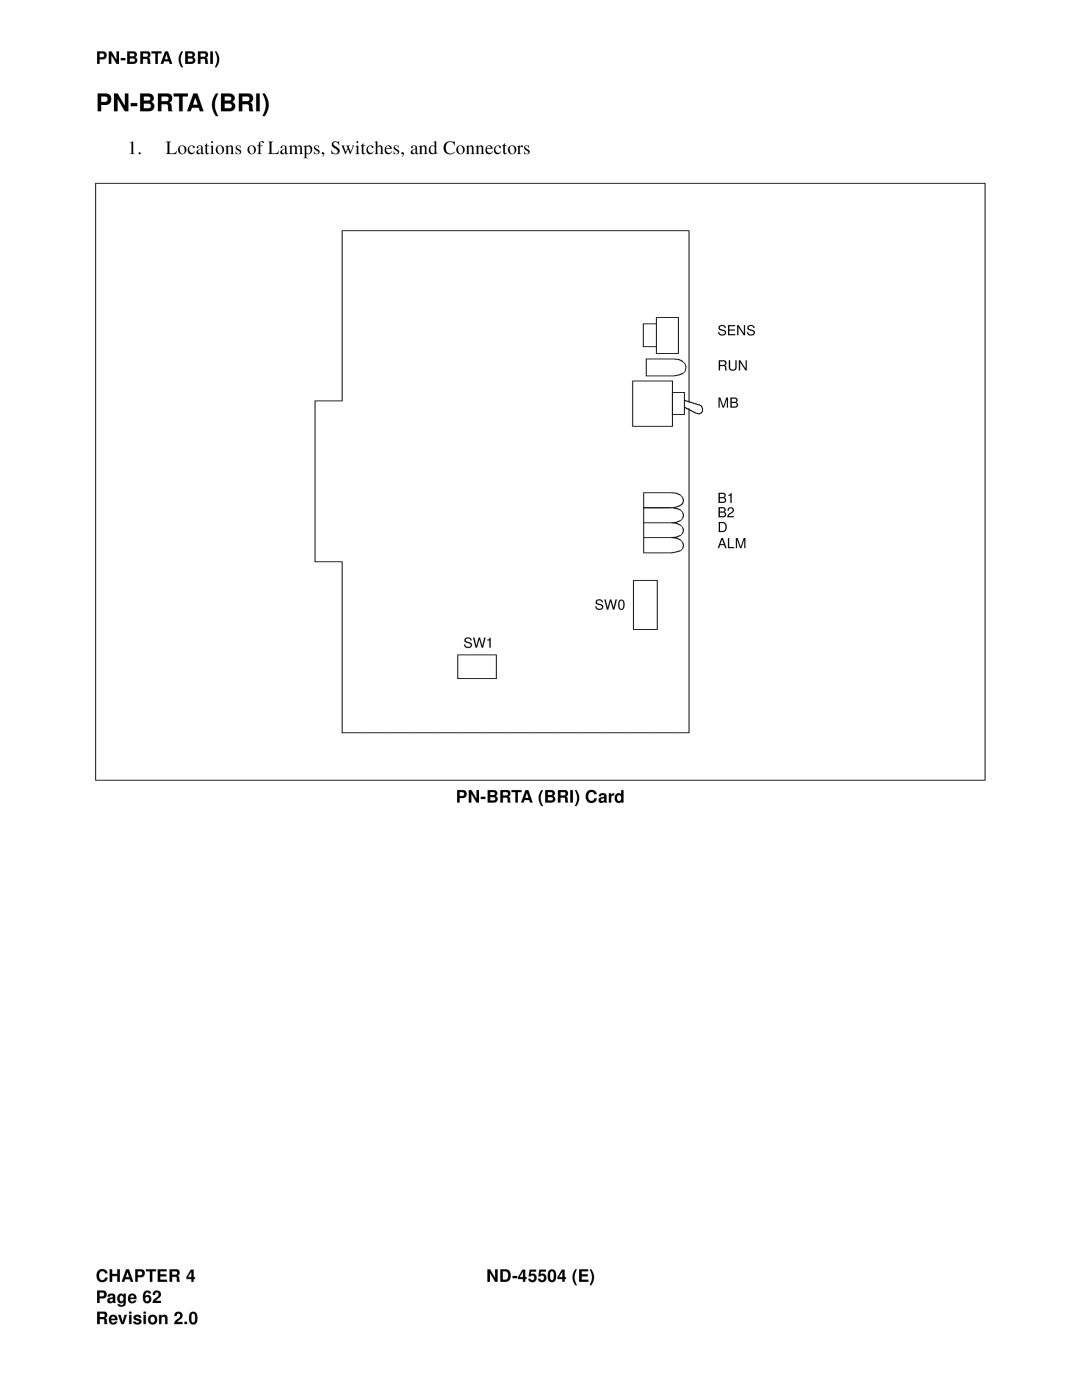 NEC 2000 IVS Pn-Brtabri, Locations of Lamps, Switches, and Connectors, PN-BRTABRI Card, Chapter, ND-45504E, Page Revision 